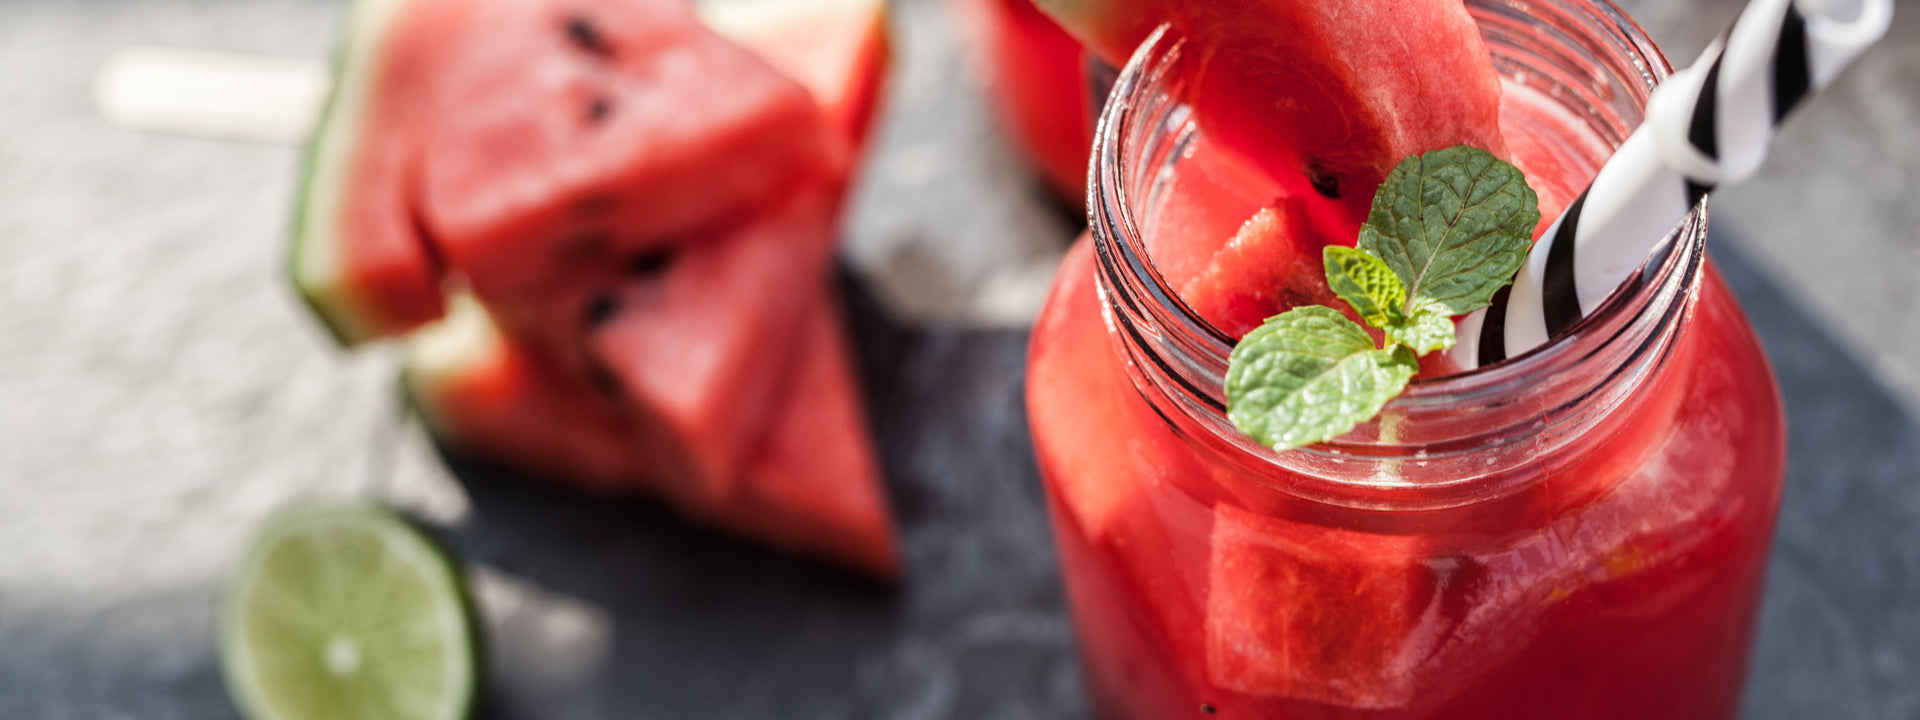 Recipe: Coconut and Watermelon, Absolutely!